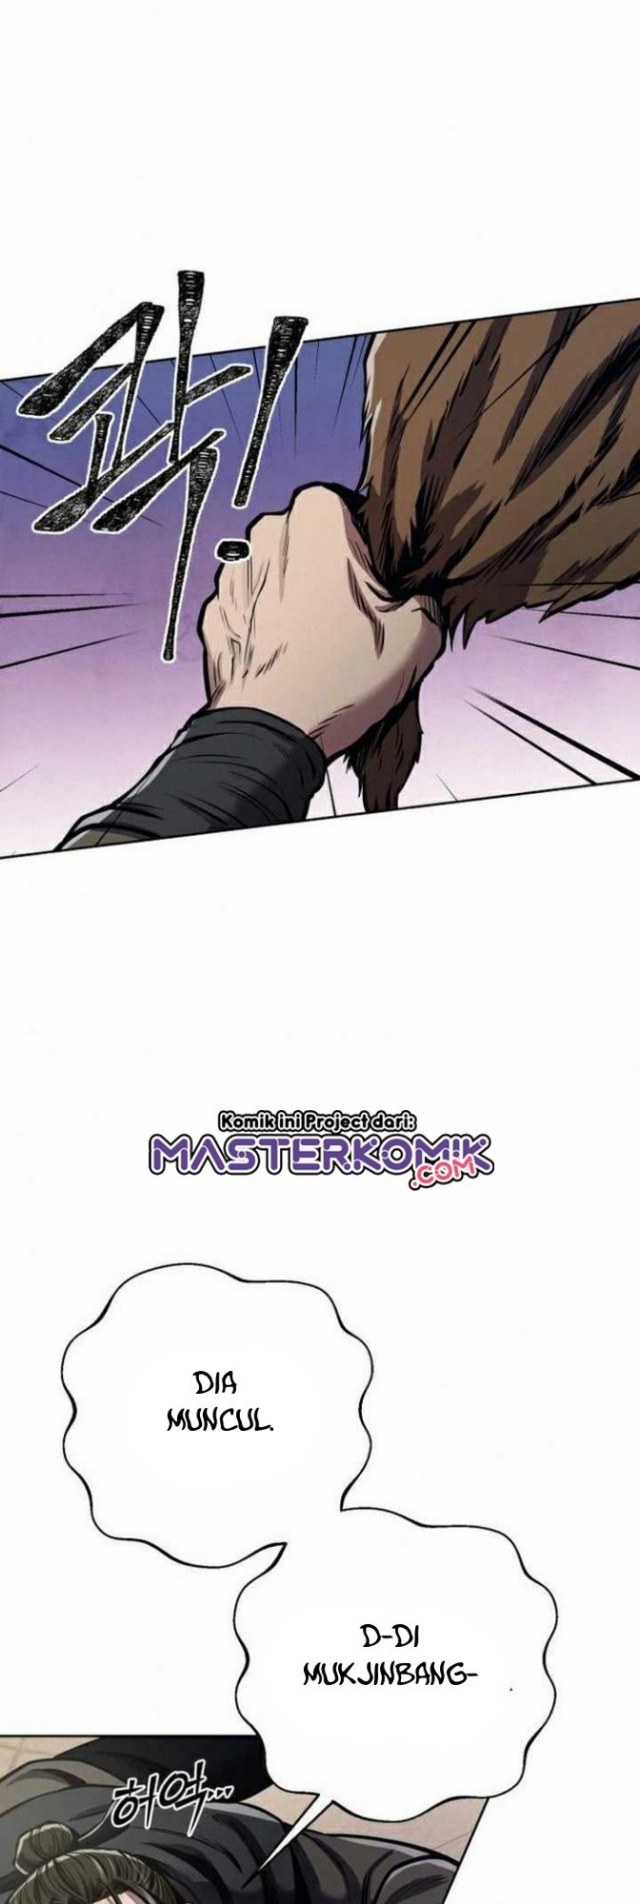 Revenge Of Young Master Peng Chapter 17